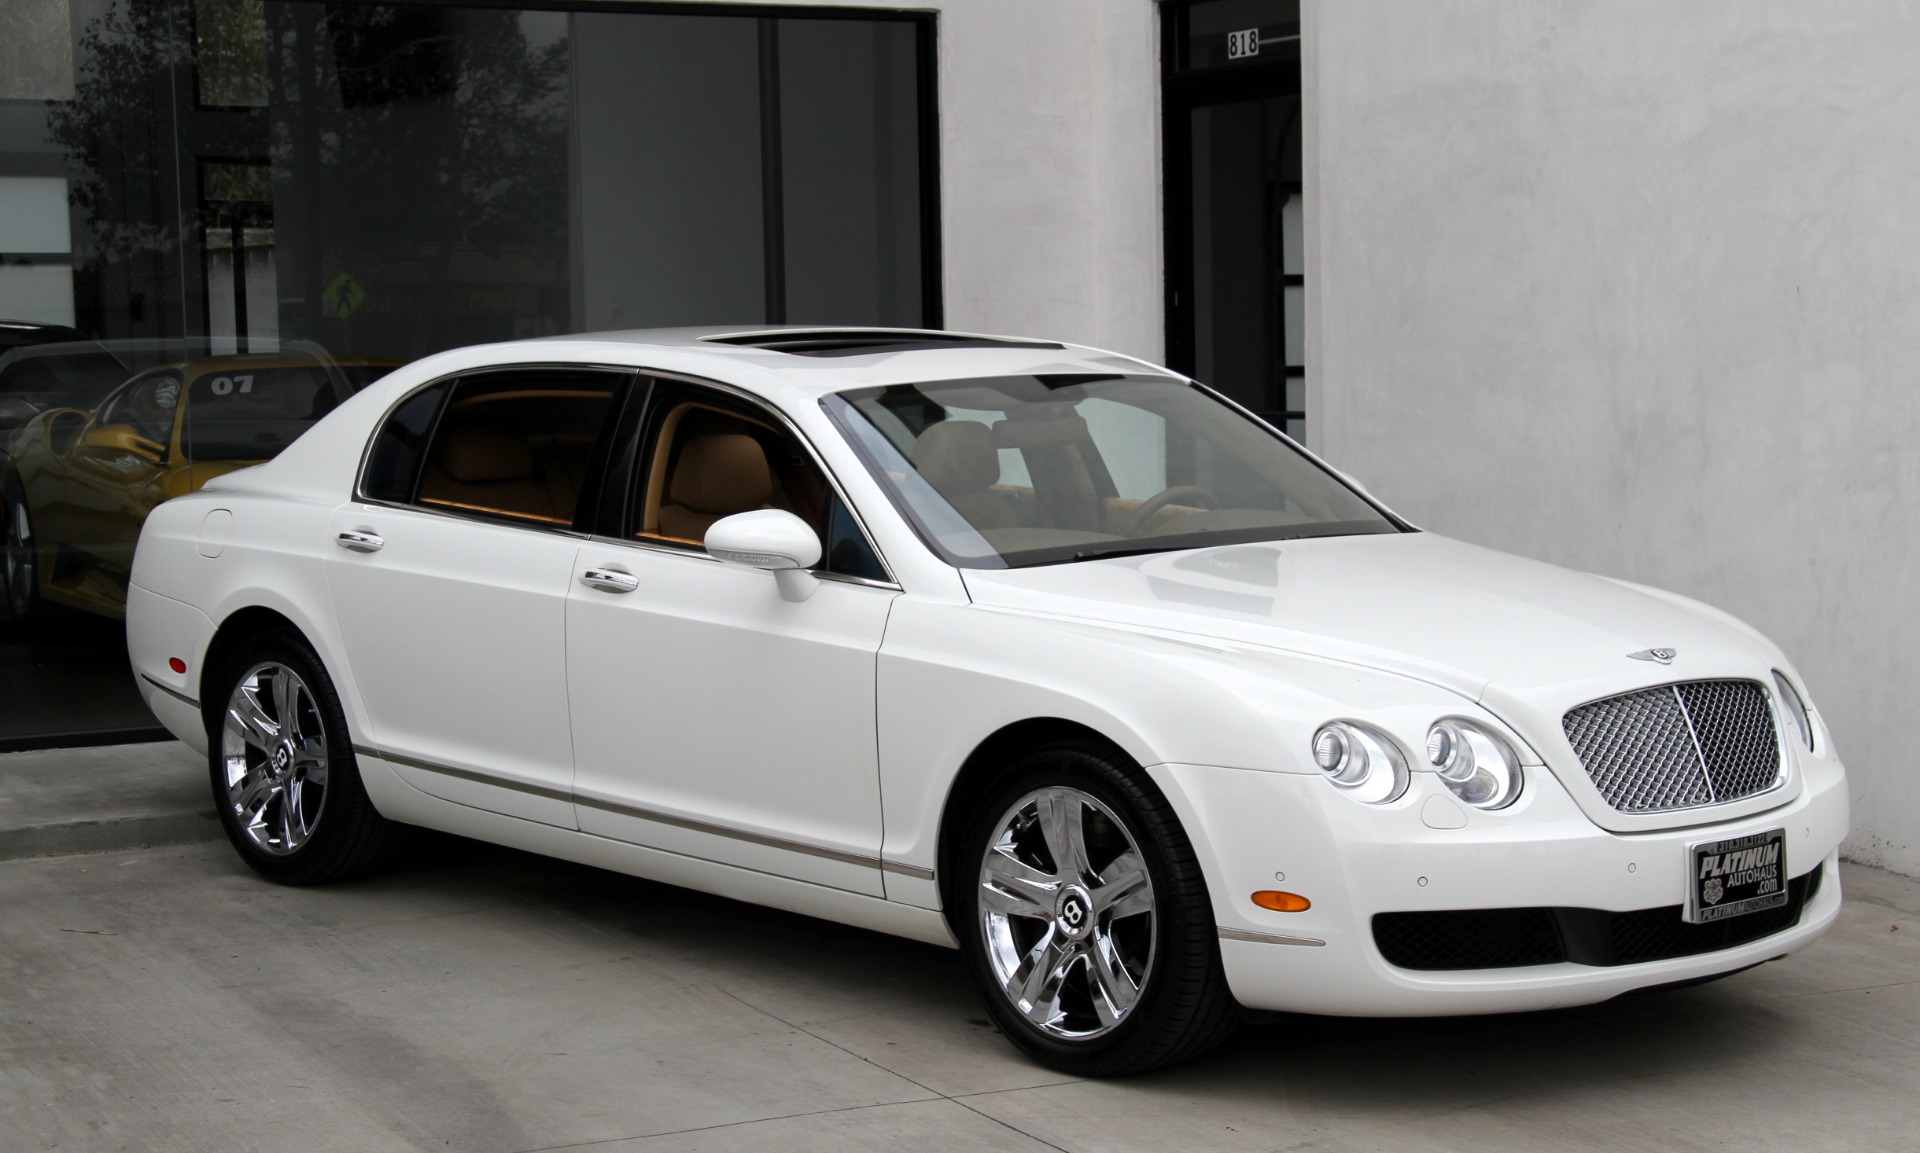 2007 Bentley Continental Flying Spur *** LOW MILES *** Stock # 6123A for  sale near Redondo Beach, CA | CA Bentley Dealer